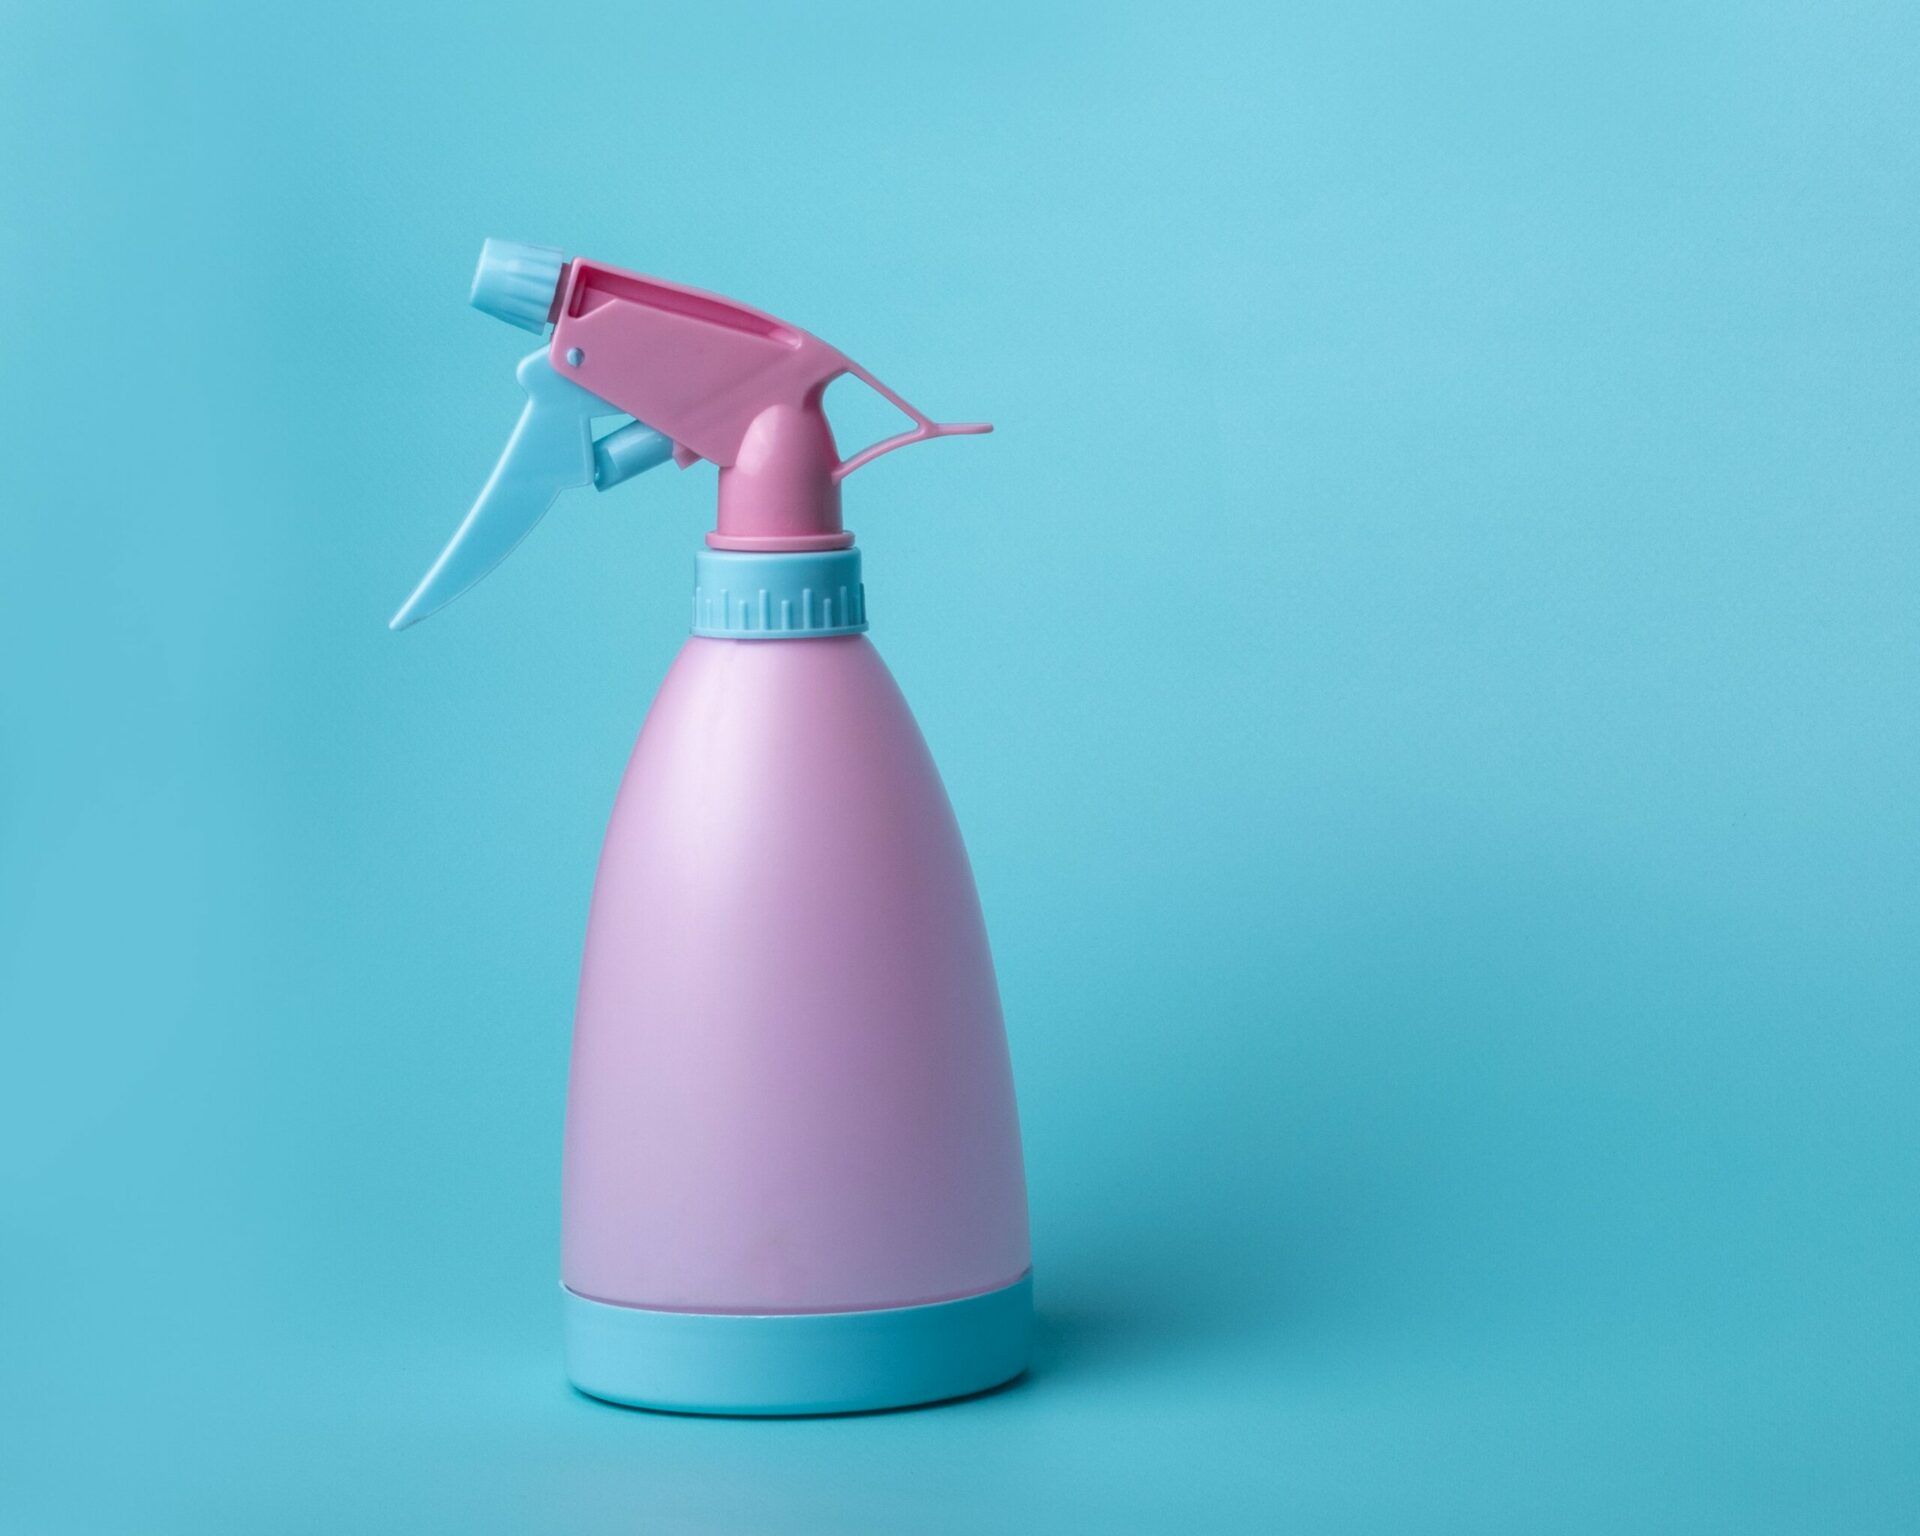 A pink and blue water squirt bottle on a blue background.